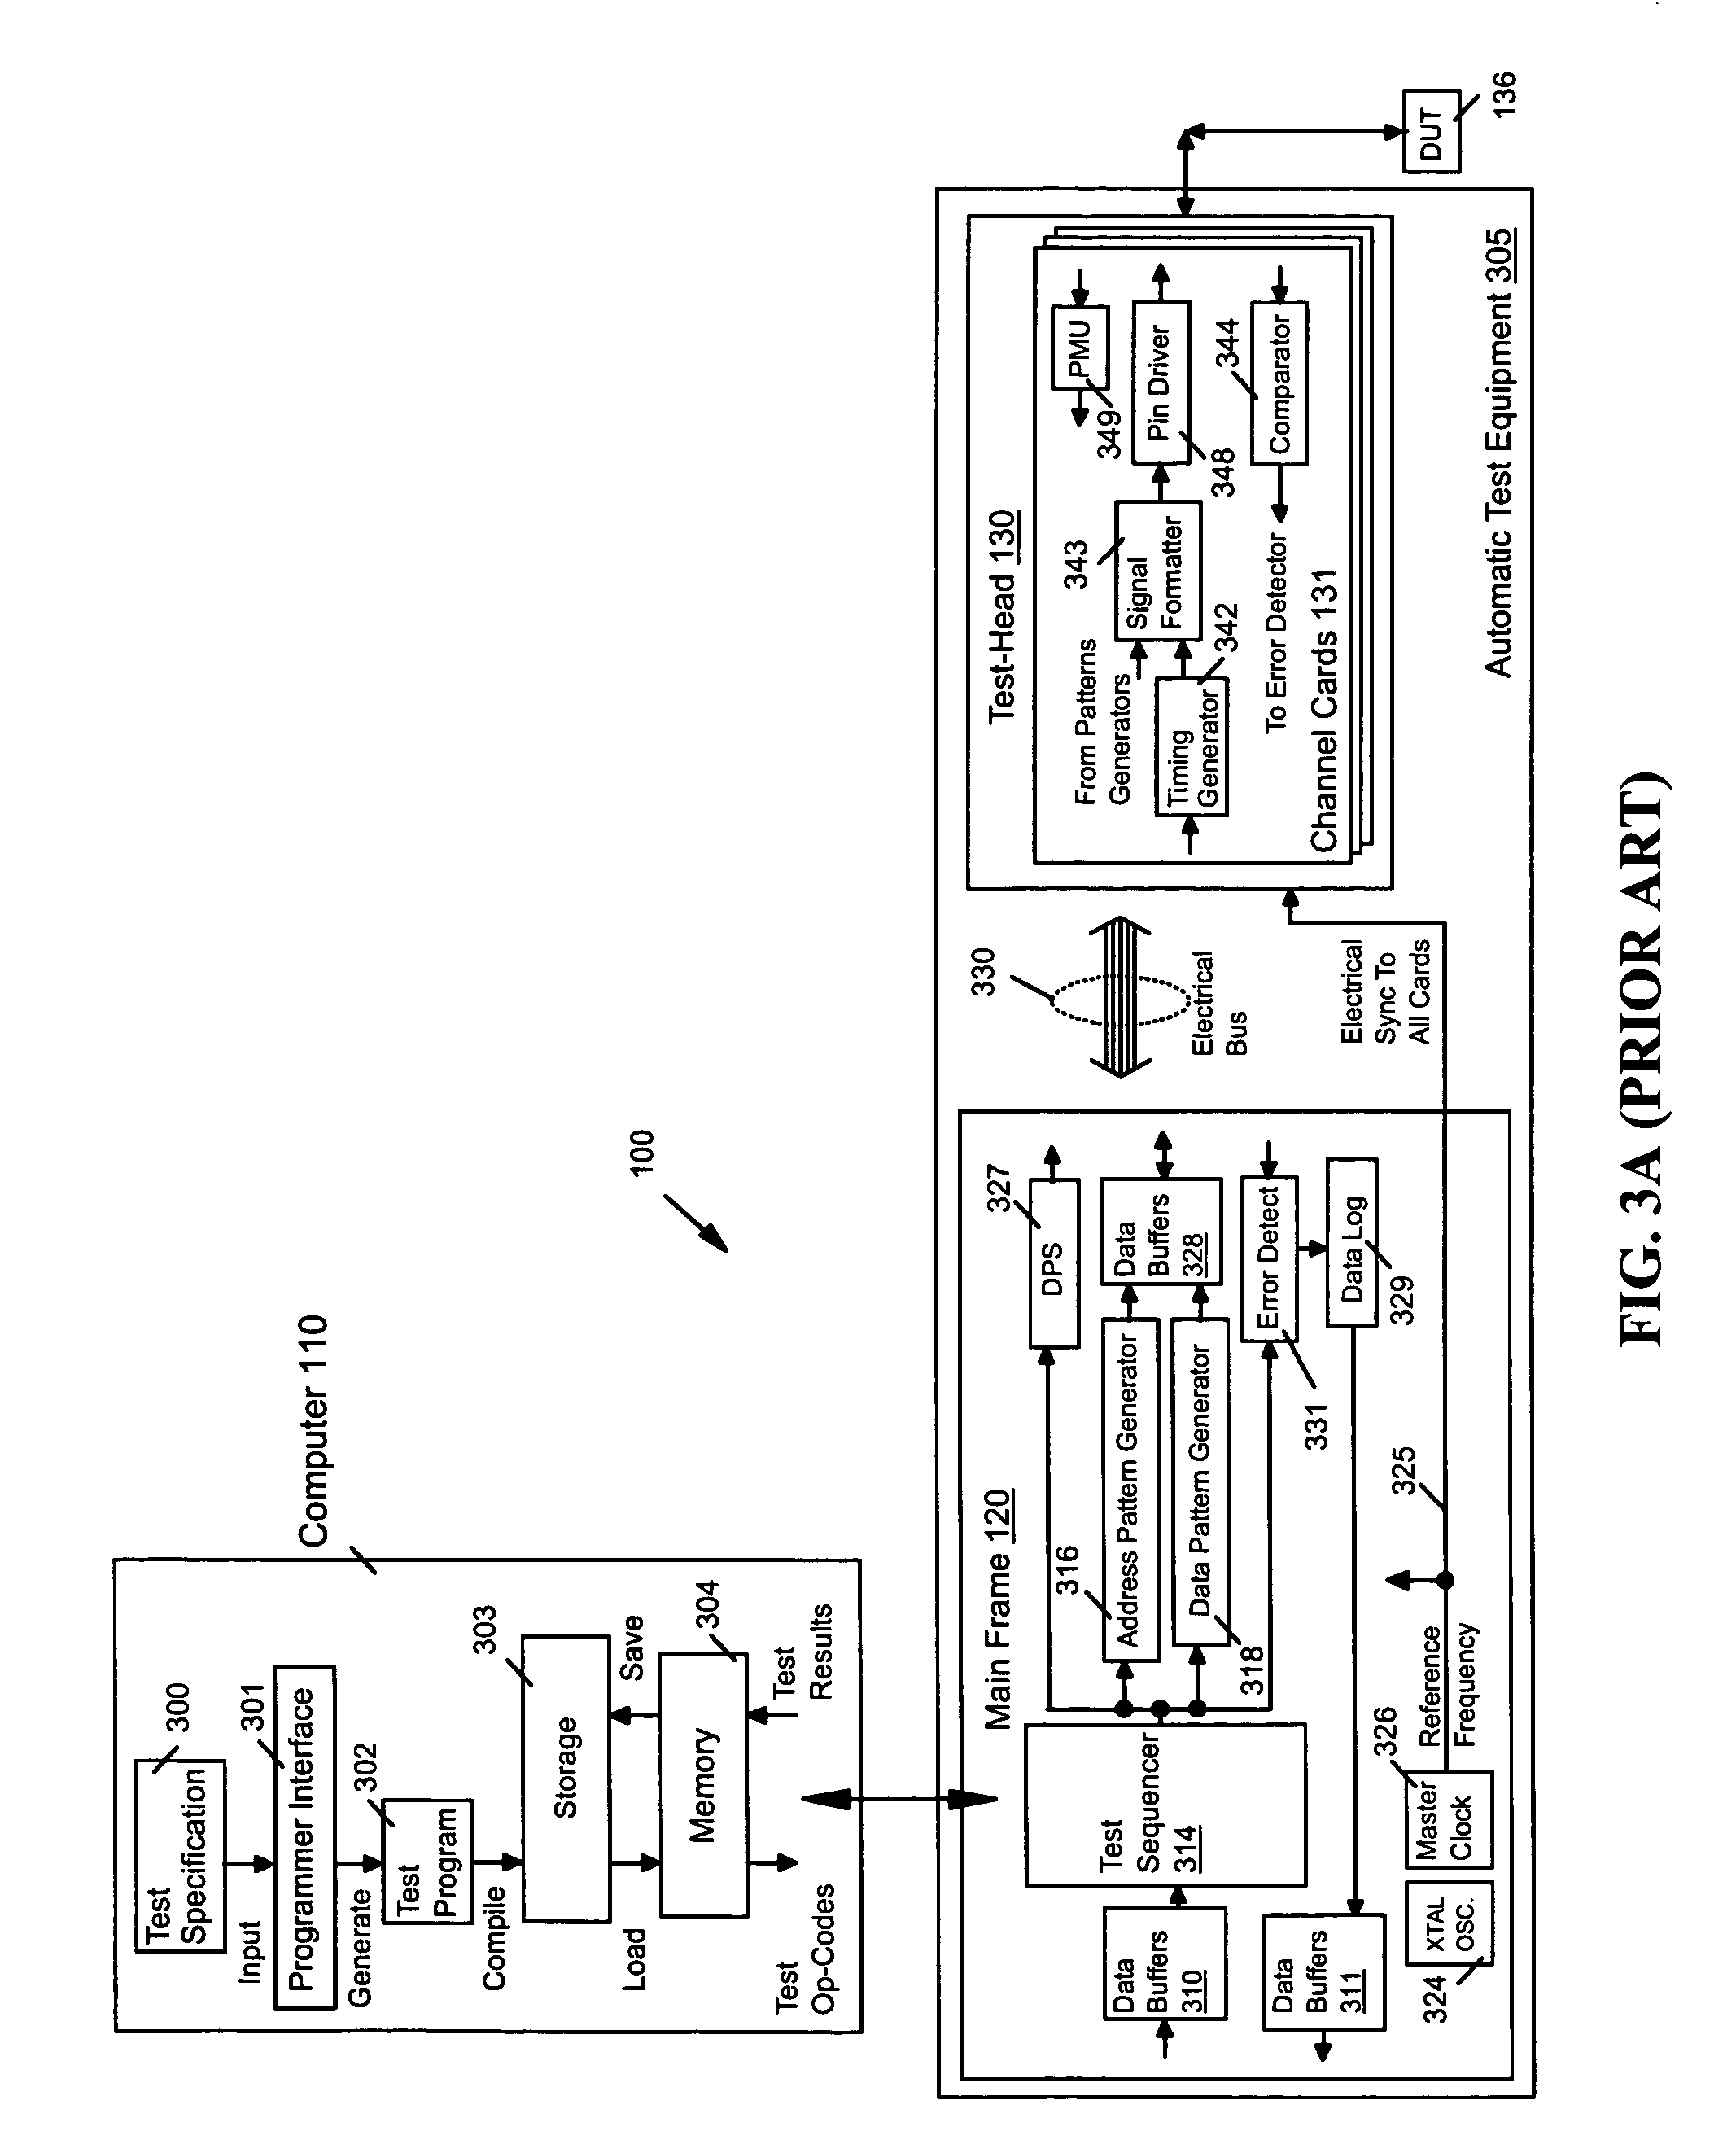 Method, apparatus and computer program product for high speed memory testing